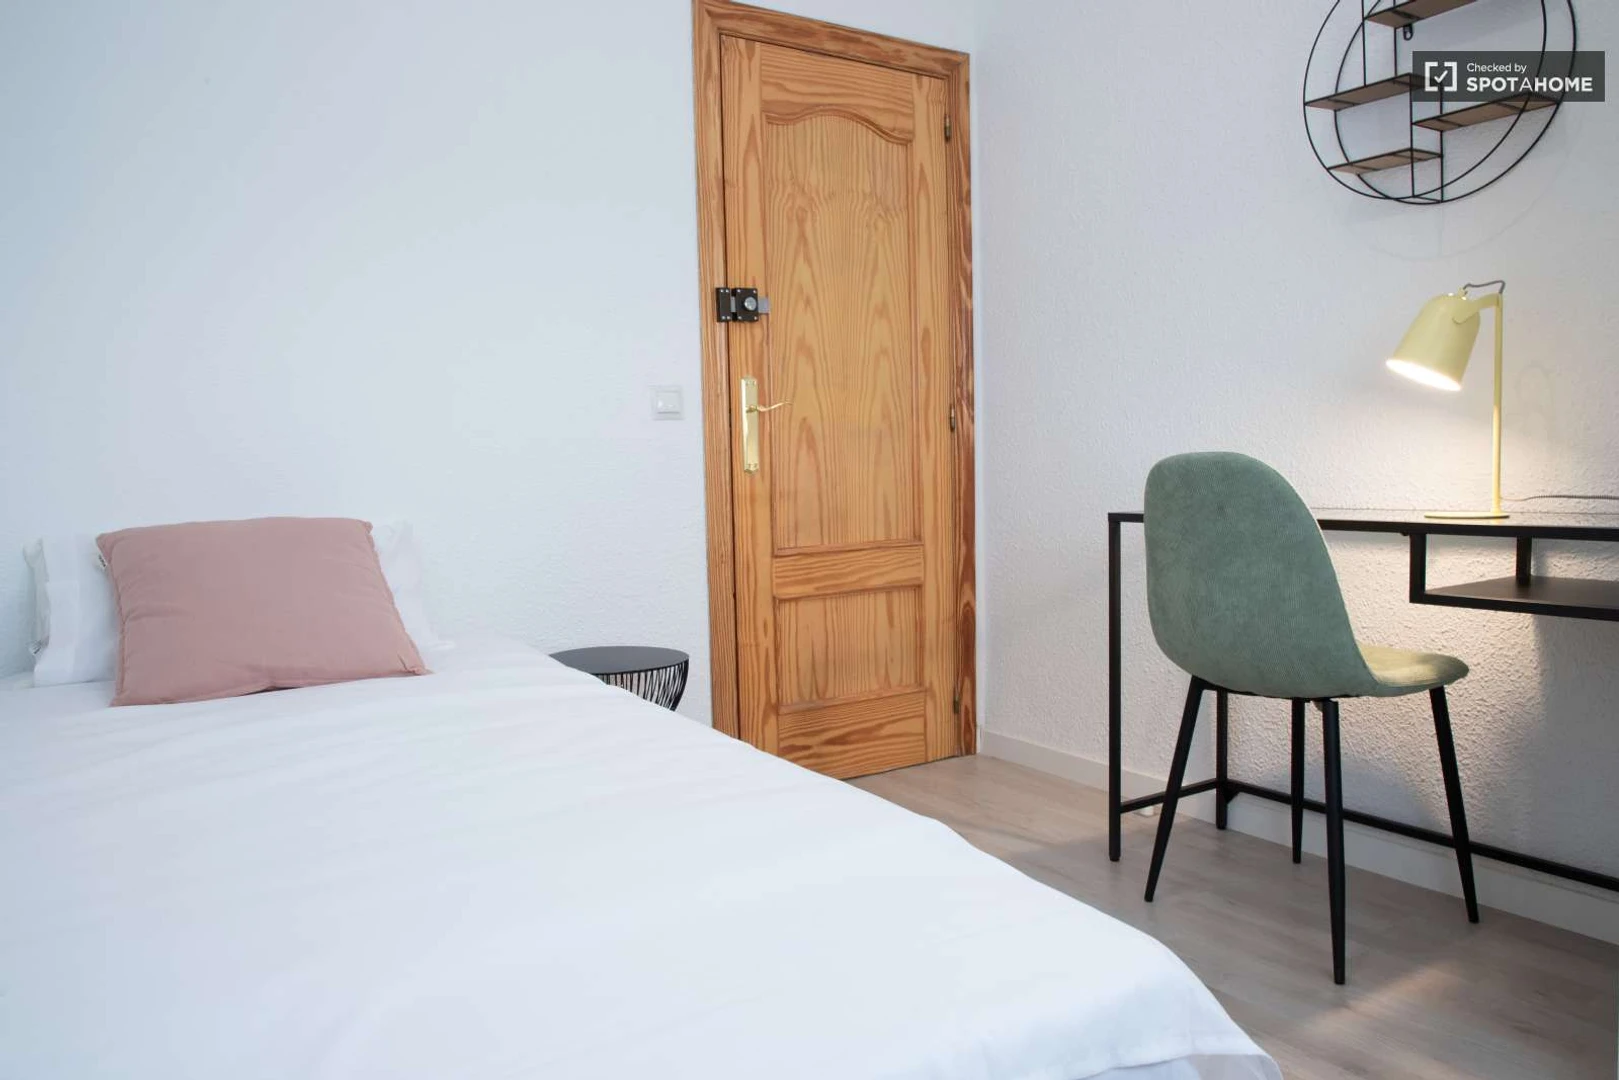 Renting rooms by the month in fuenlabrada